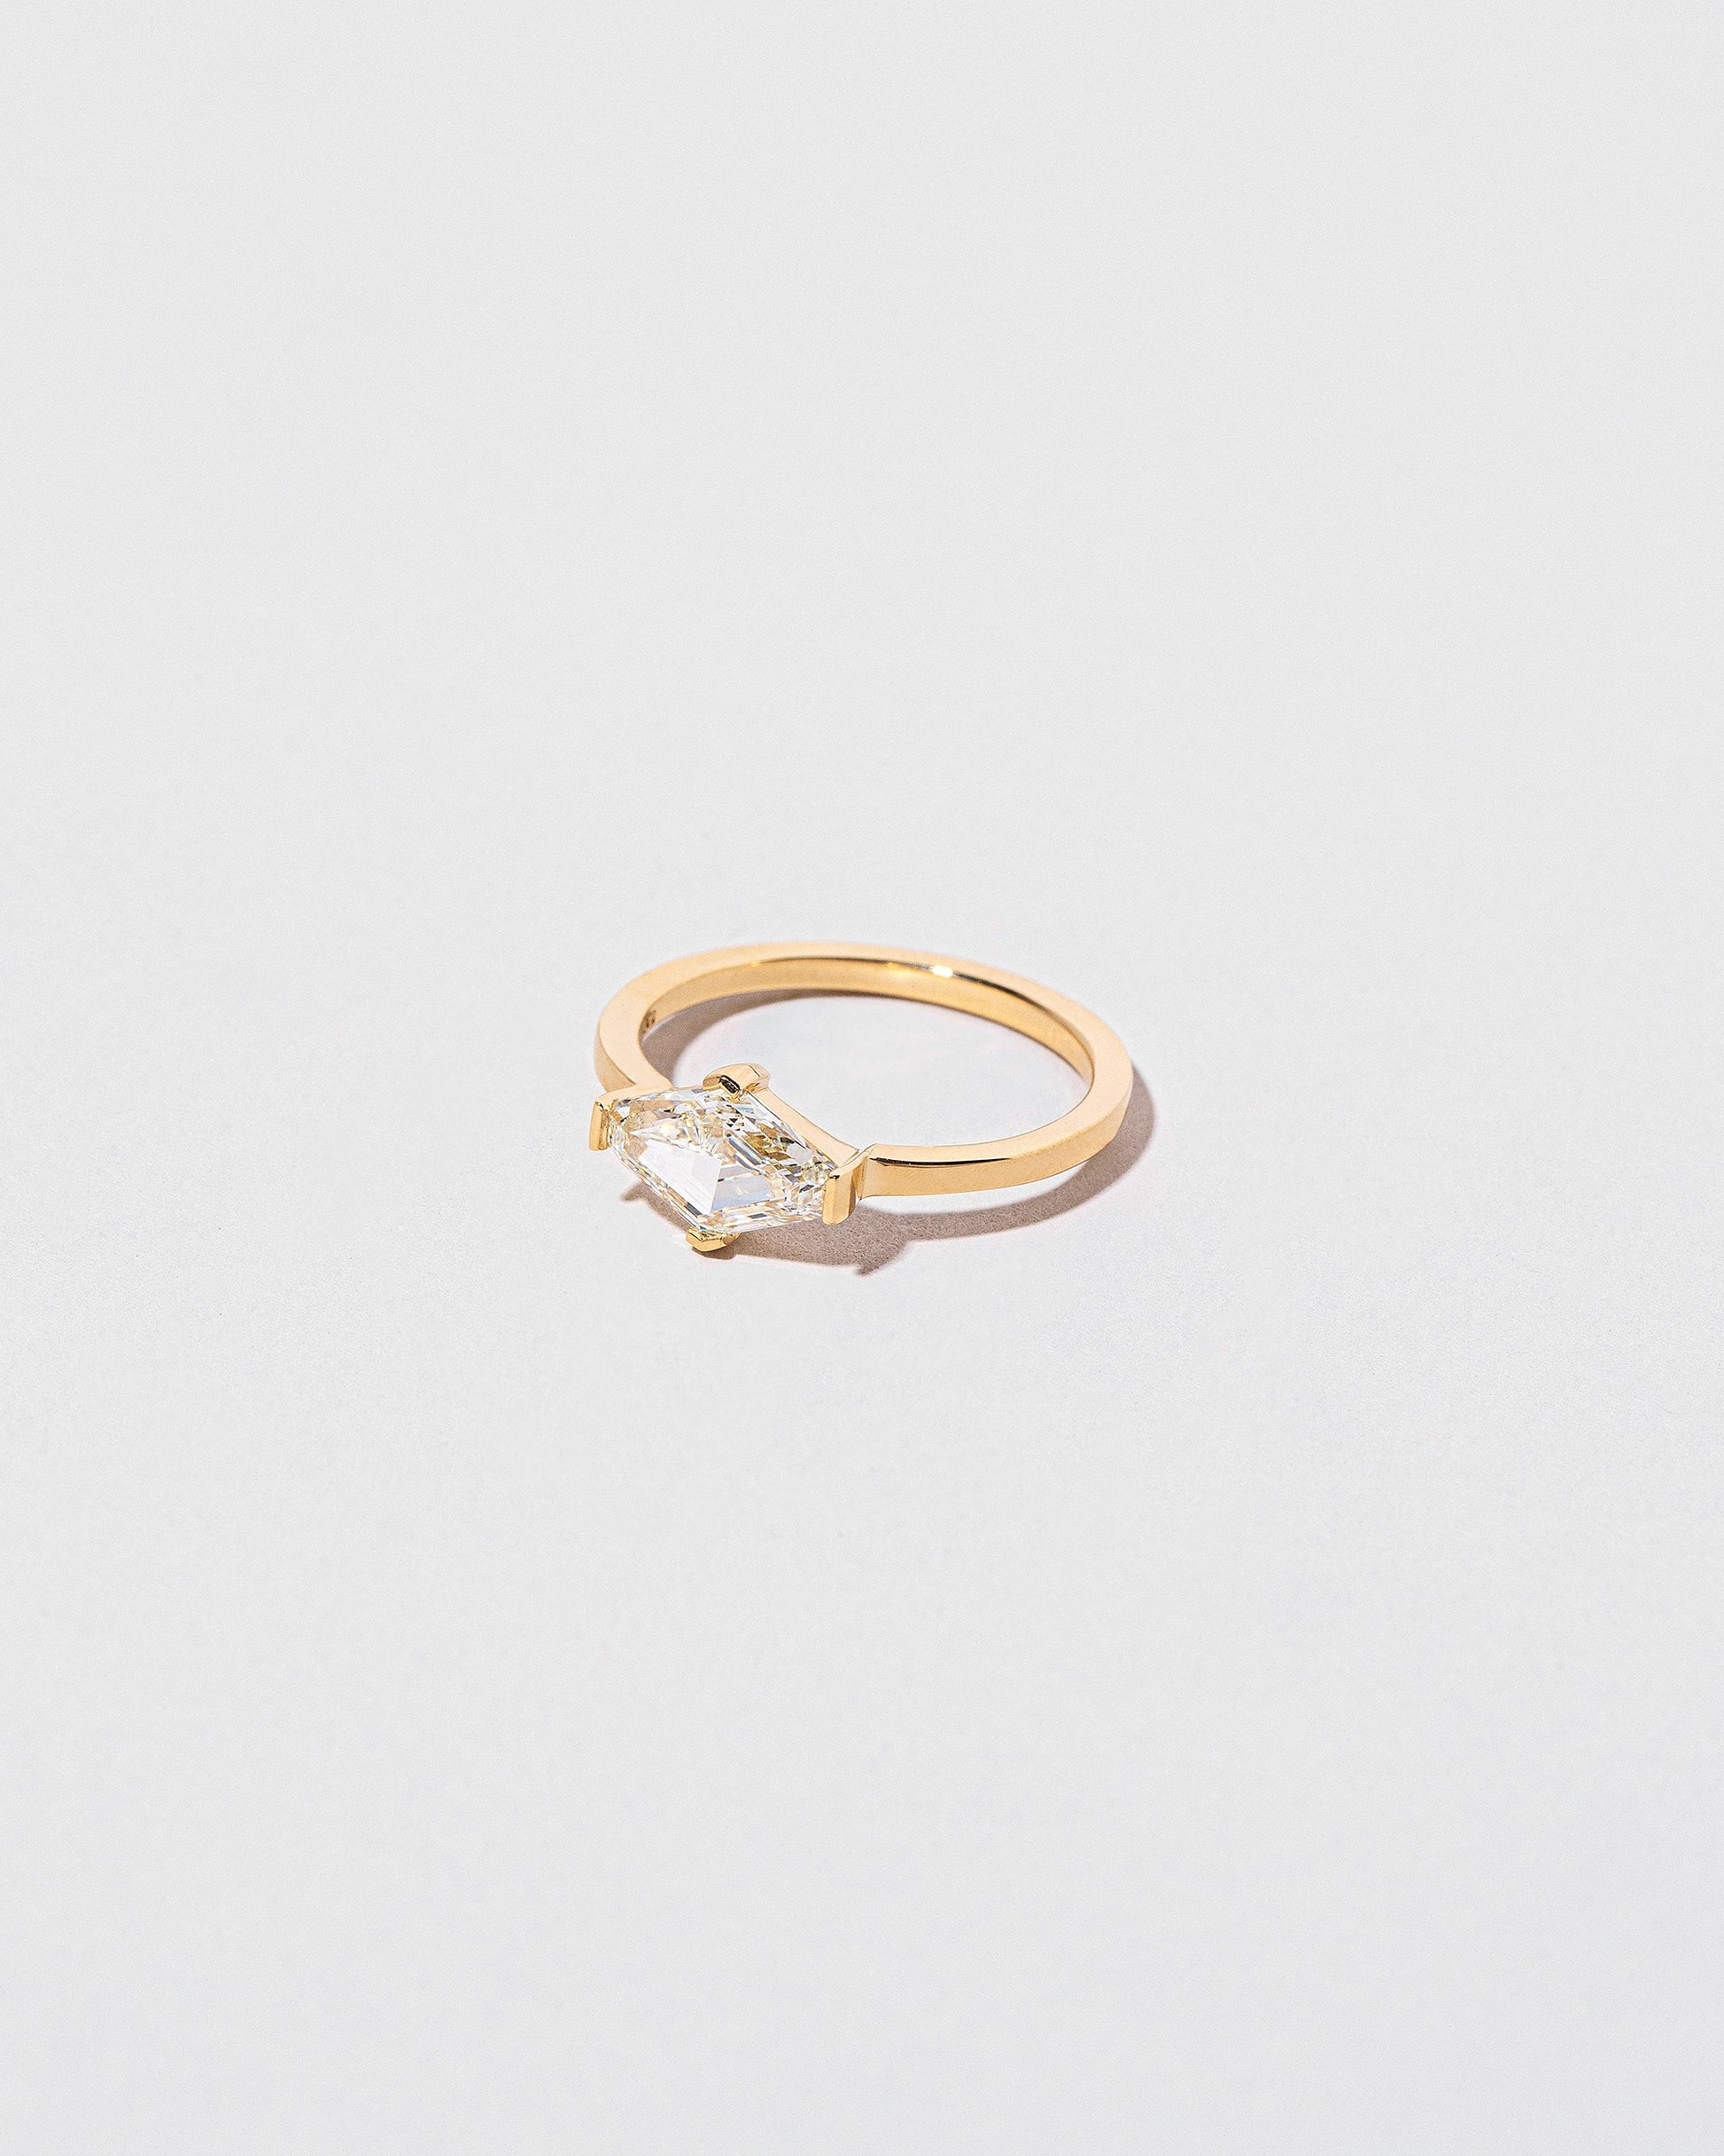  Divine Geometry Ring on light color background.